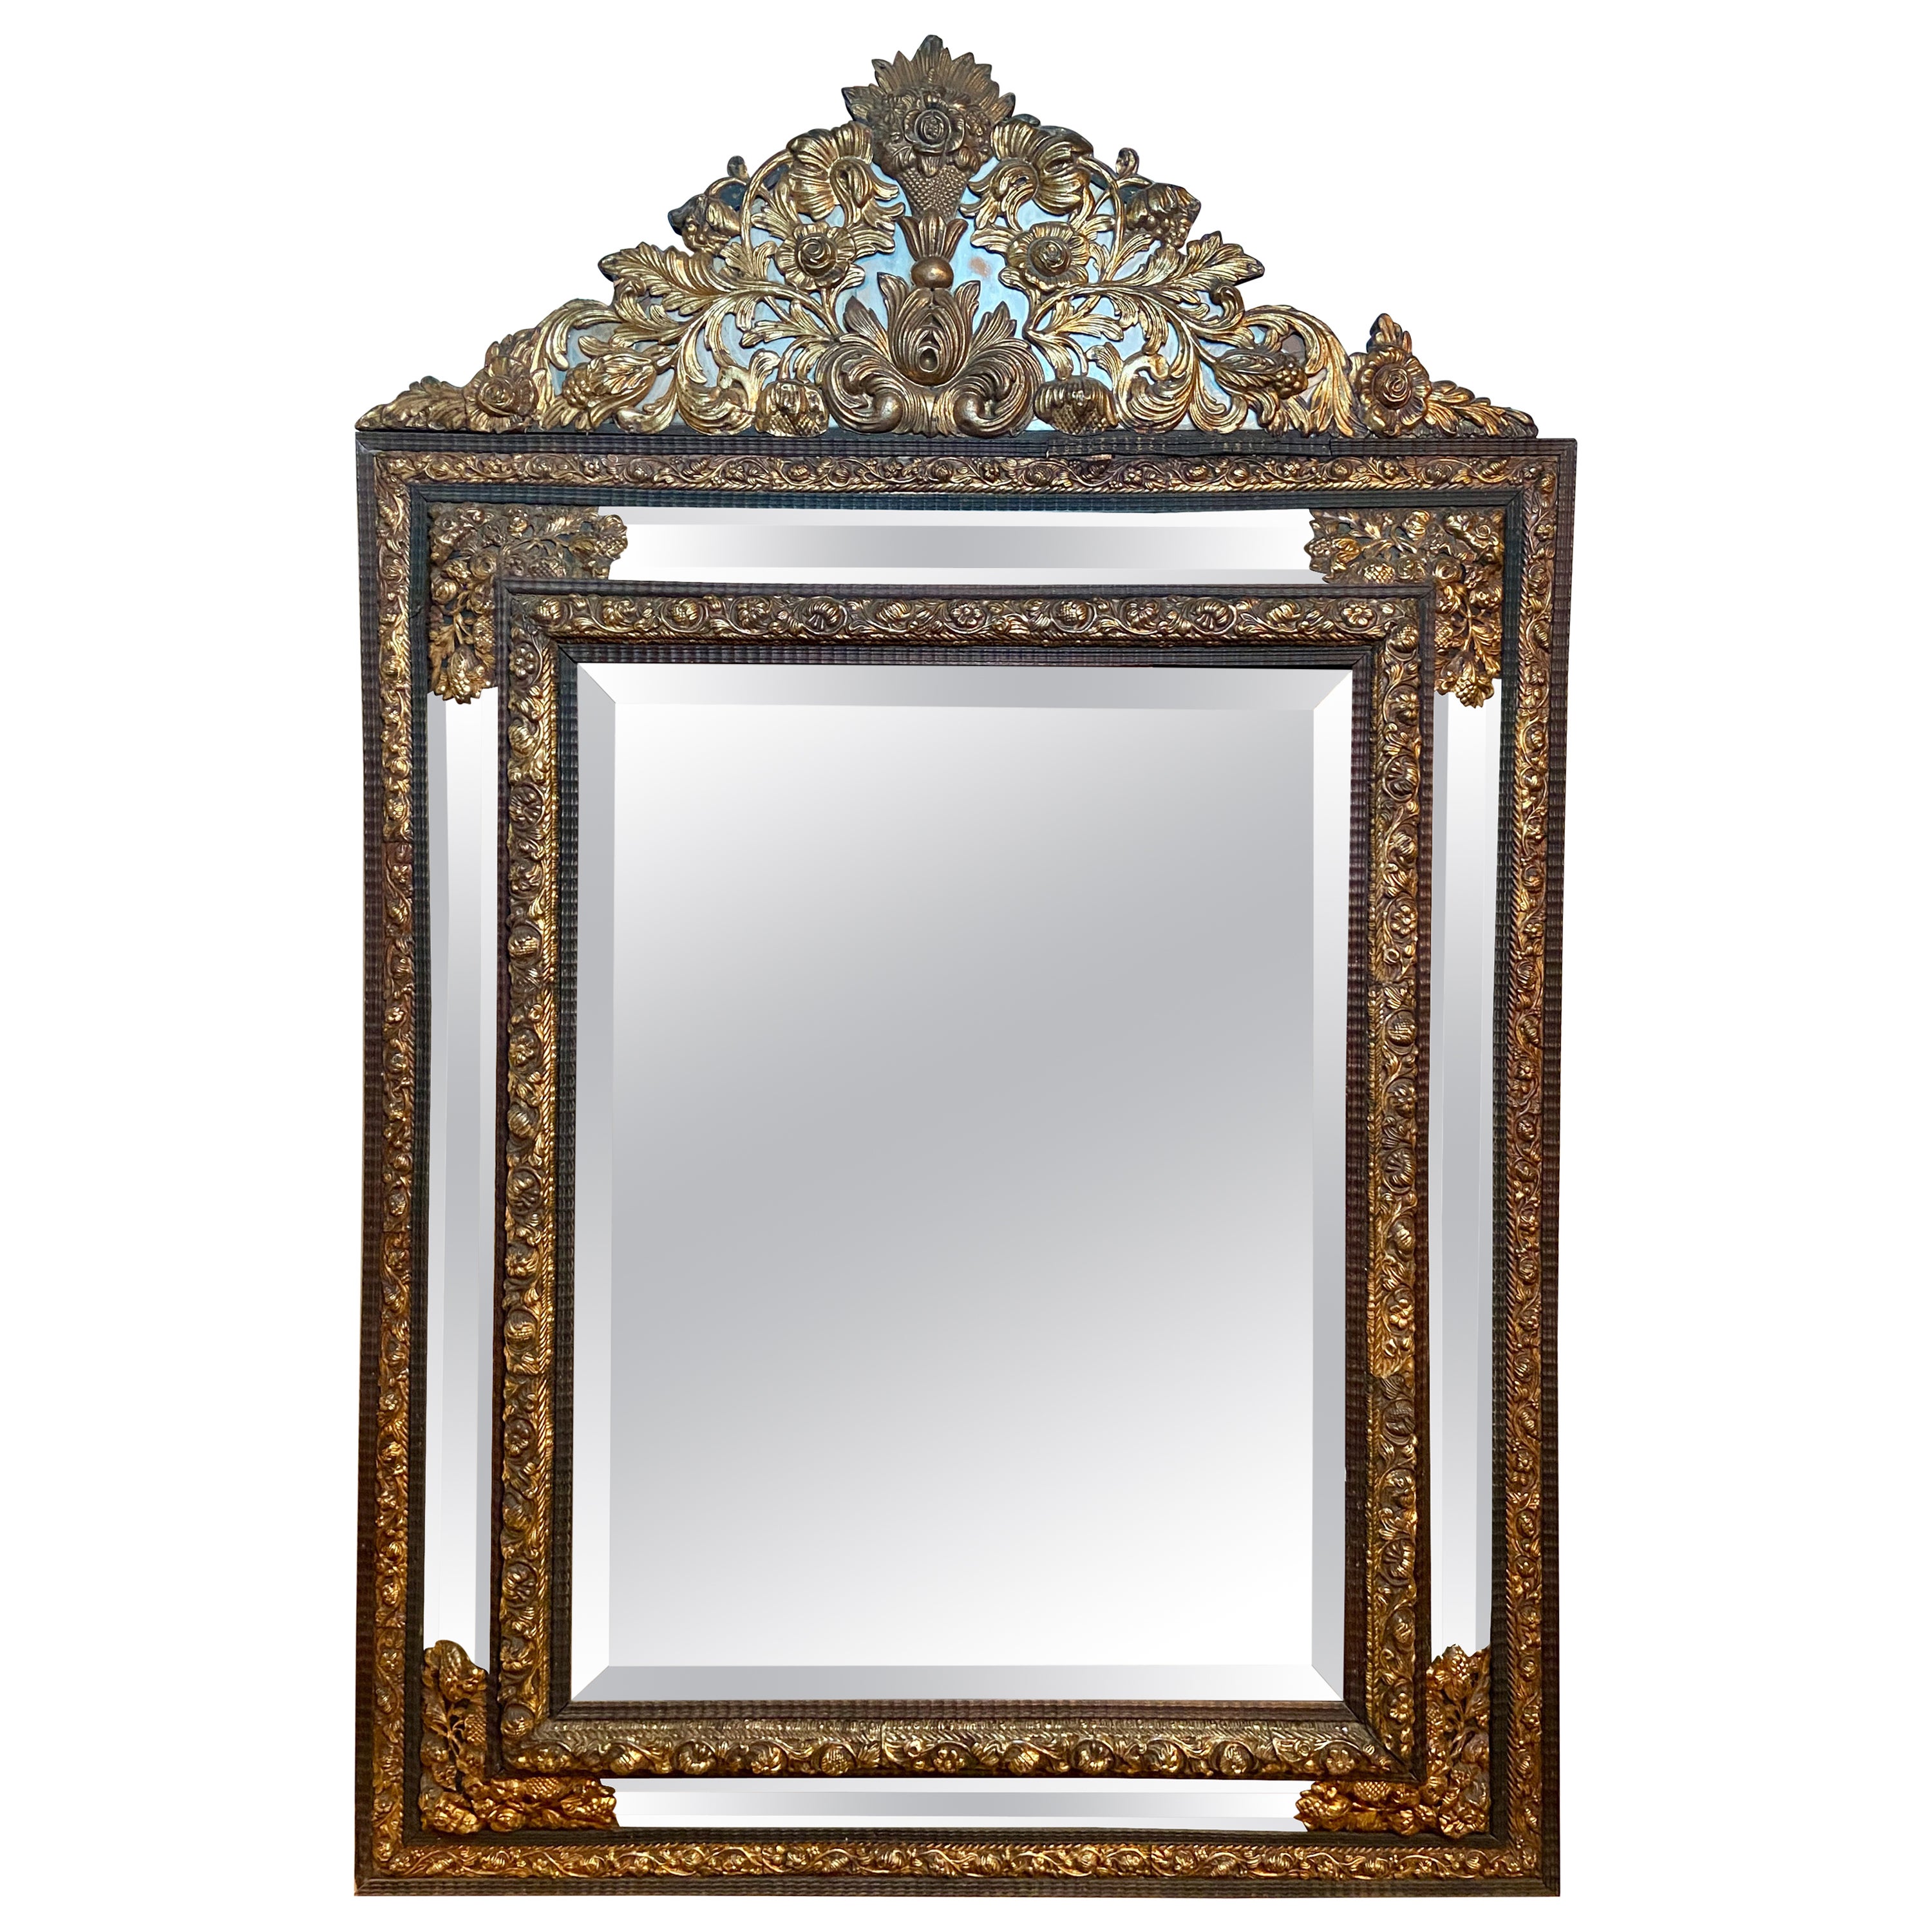 Antique French Brass Repoussé Paneled Mirror with Beveling, Circa 1860 For Sale